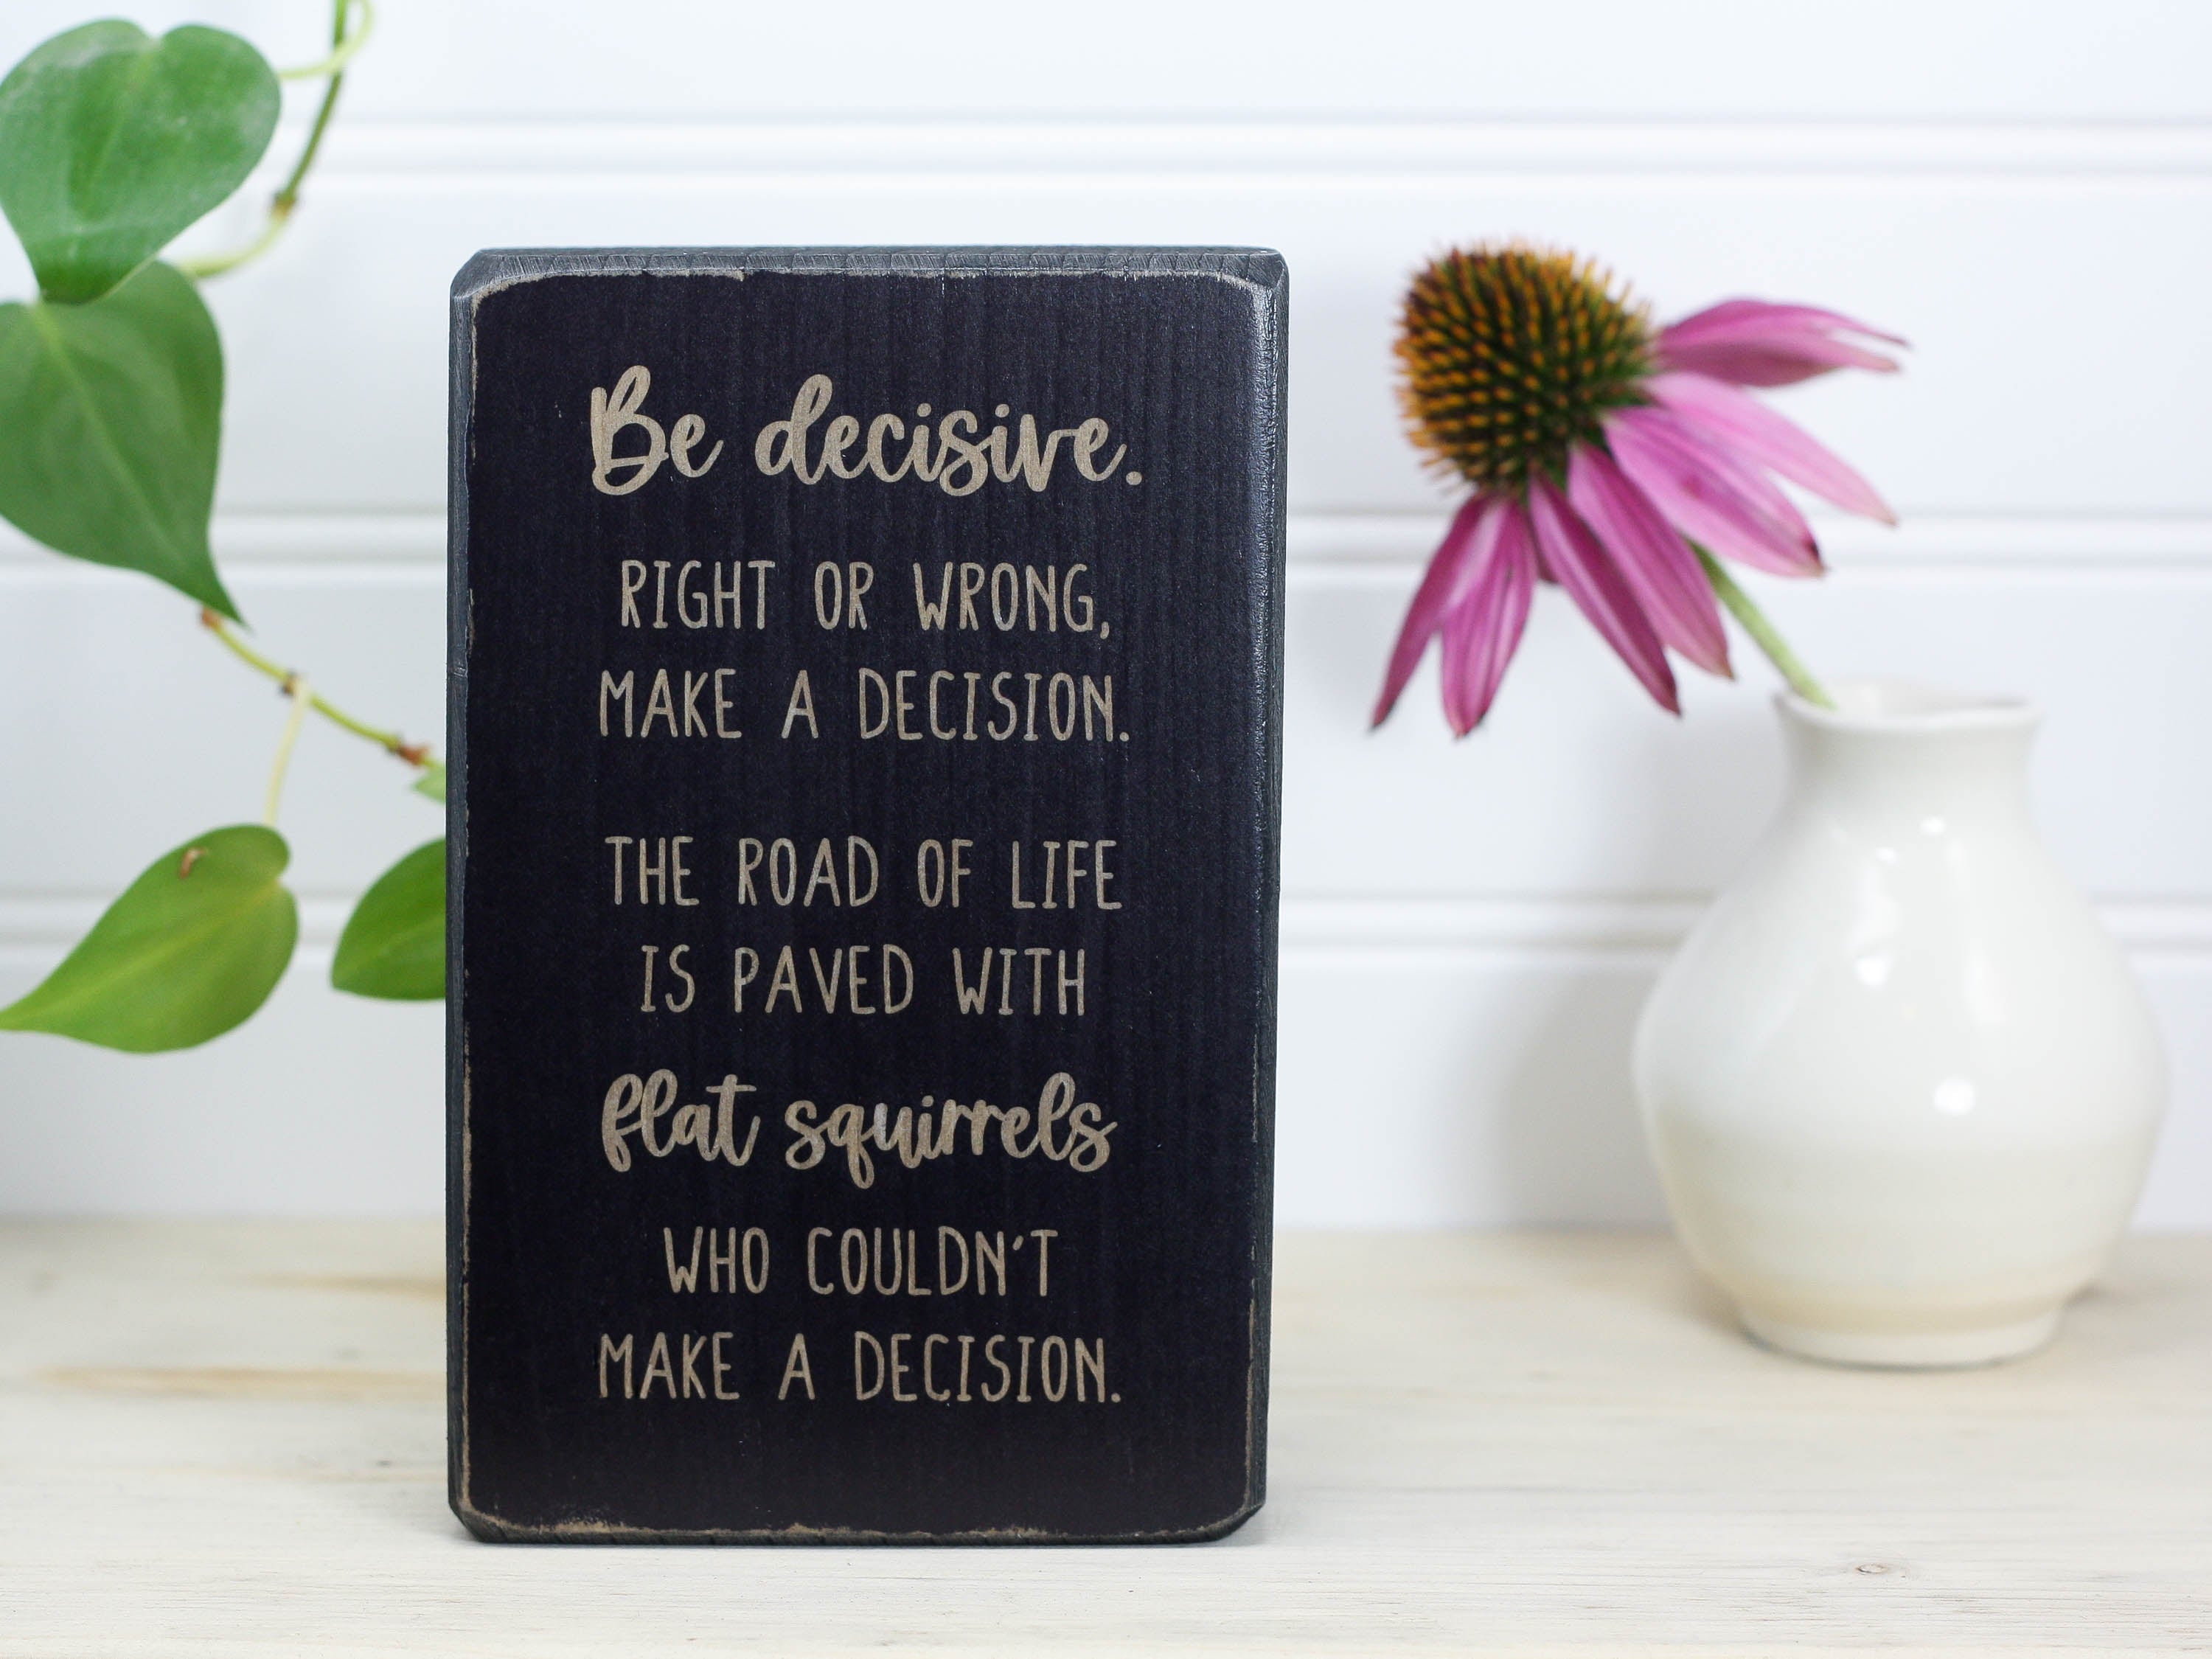 Small distressed black wood freestanding sign in with the saying "Be decisive. Right or wrong, make a decision. The road of life is paved with flat squirrels who couldn't make a decision."